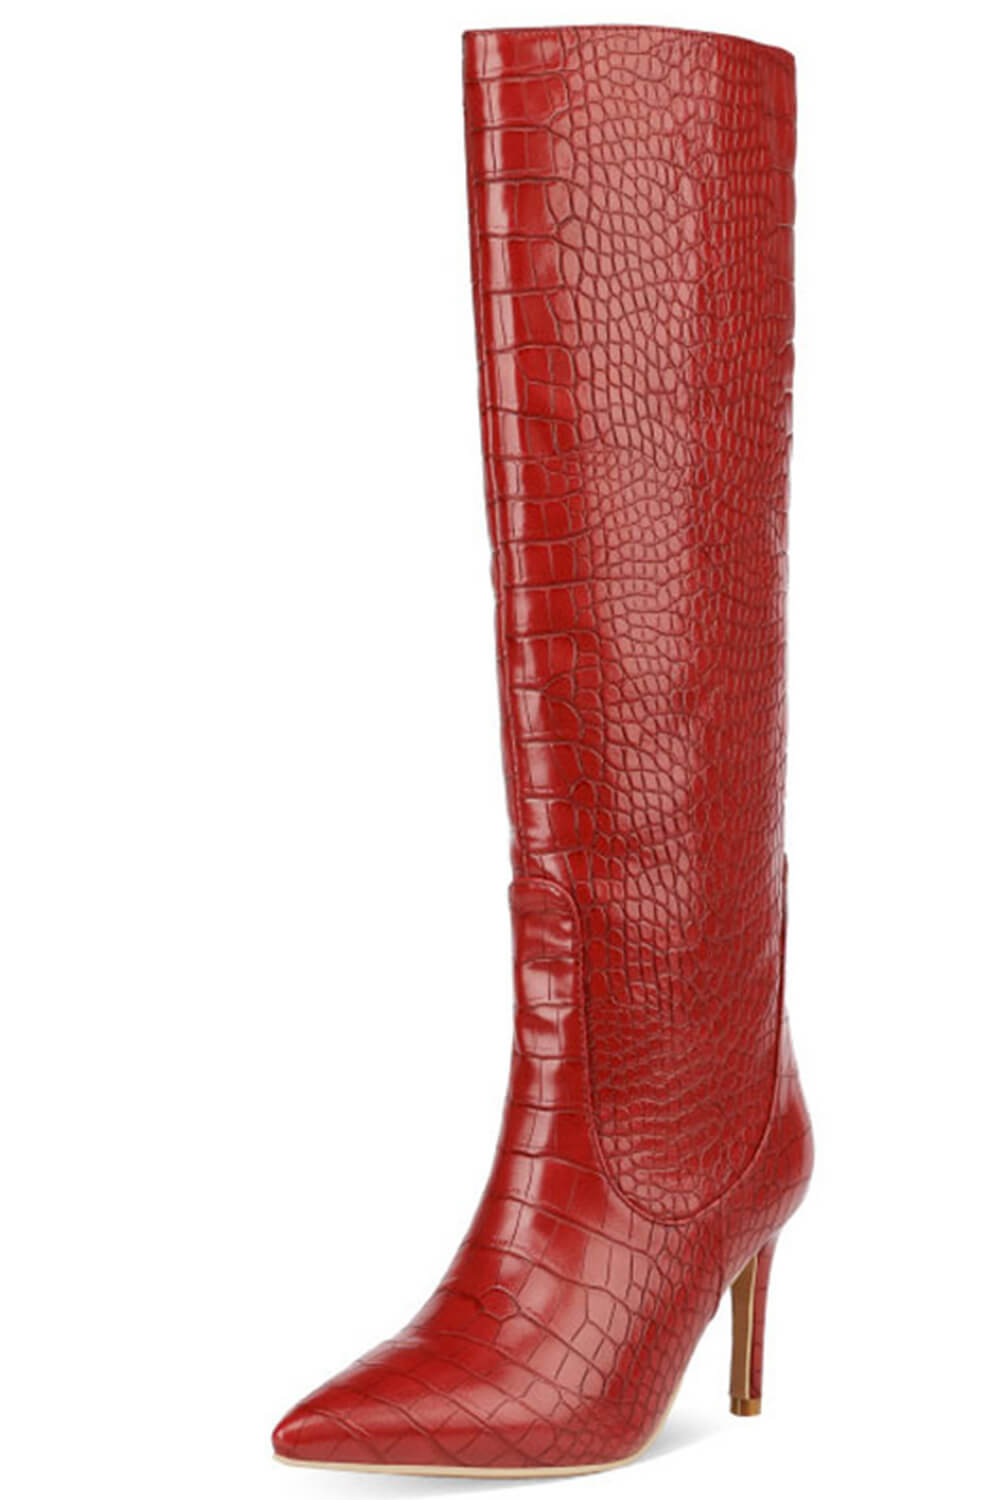 Croc Print Wide Fit Pointed Toe Stiletto Heel Knee High Boots-White/Orange/Red/Green/Black/Cyan/Brown/Lime US 14/EU 45 / White